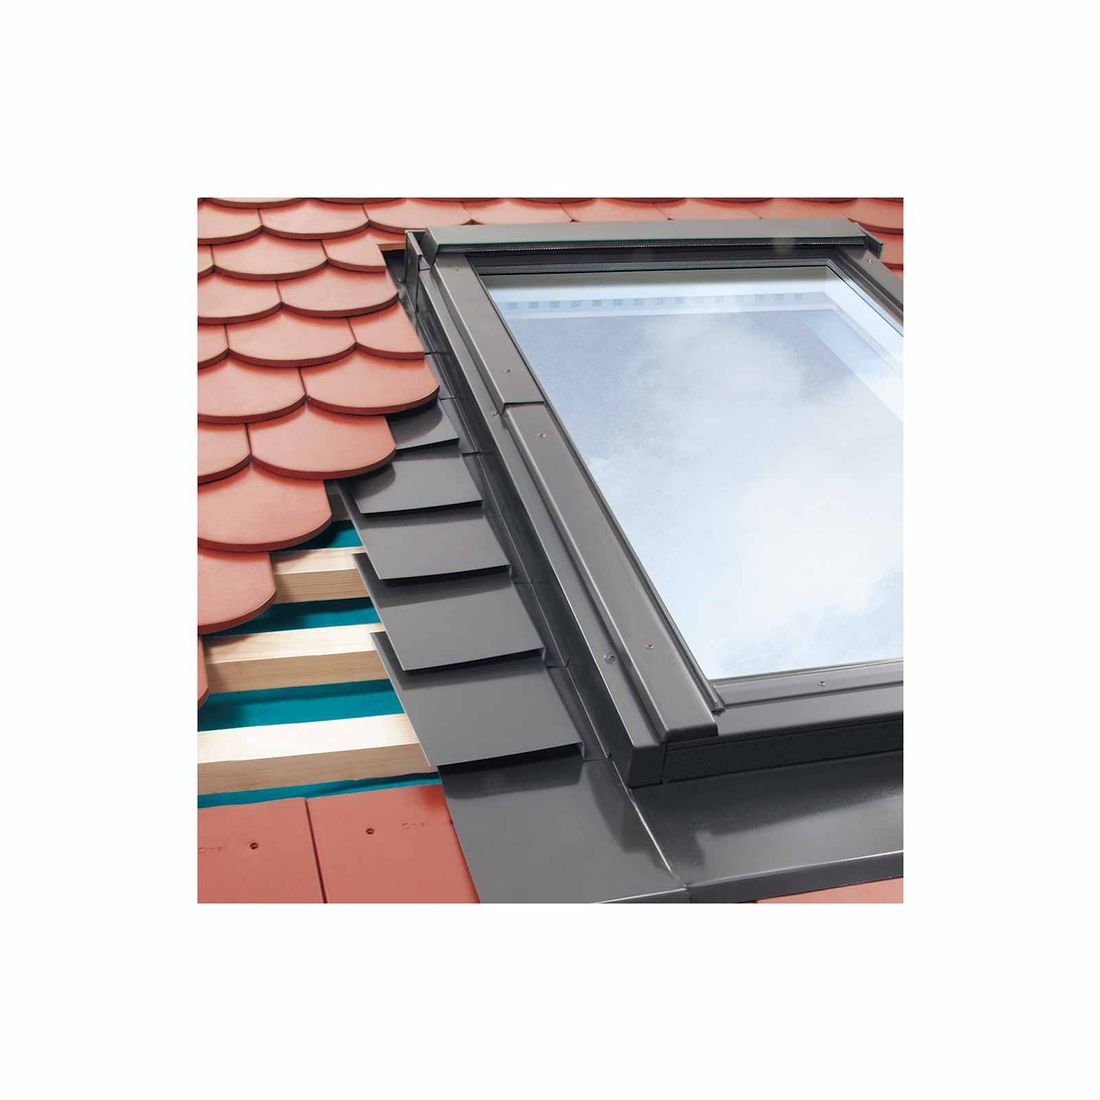 Fakro Roof Flashing Plain Tile Upto 16Mm Thick For 06 Window